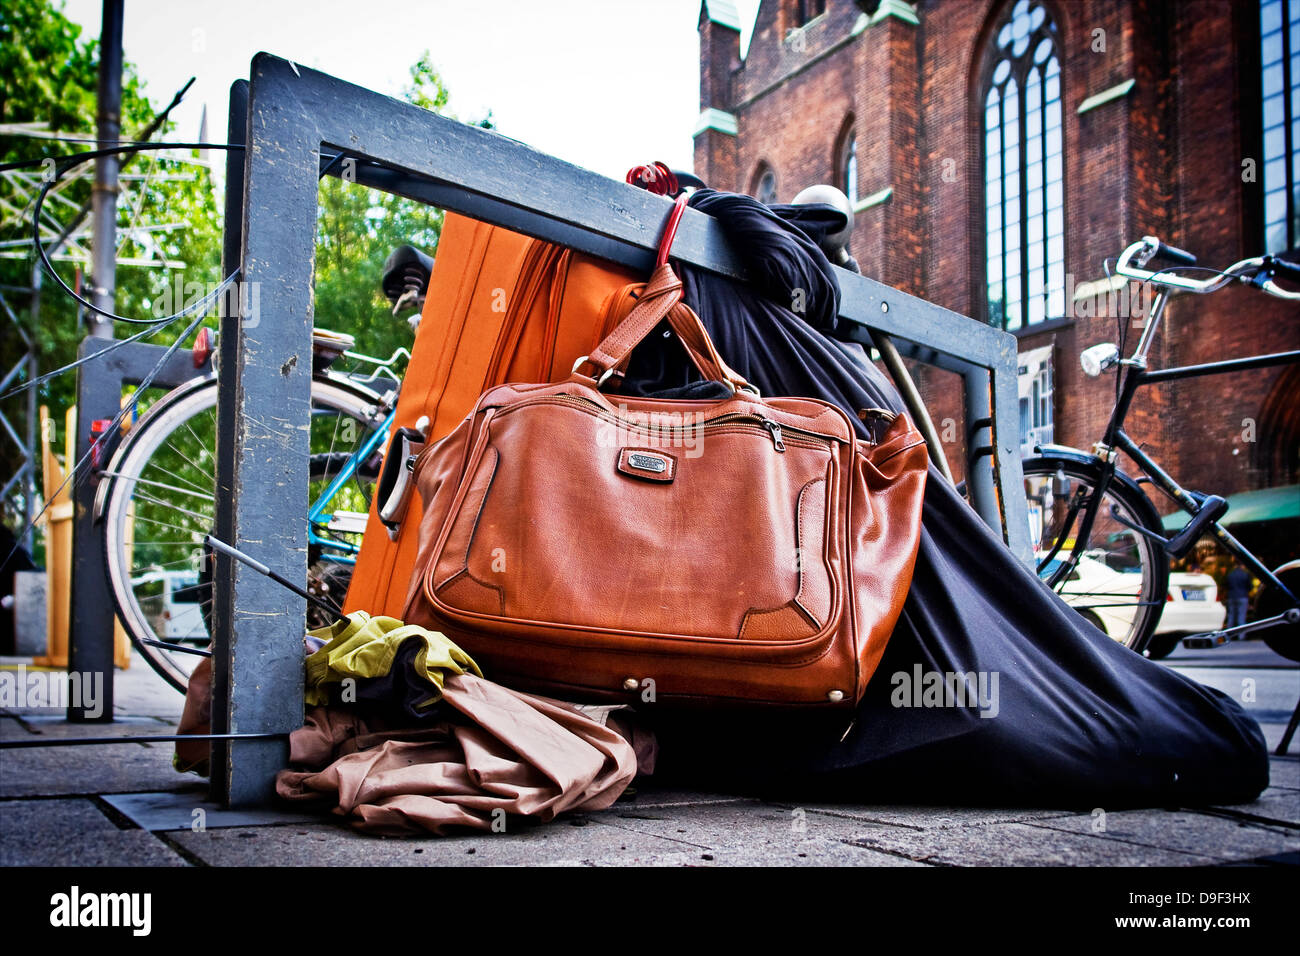 Belongings of a homeless, chained in a bicycle stand, Belongings of a homeless one, chained to a bicycle Stock Photo